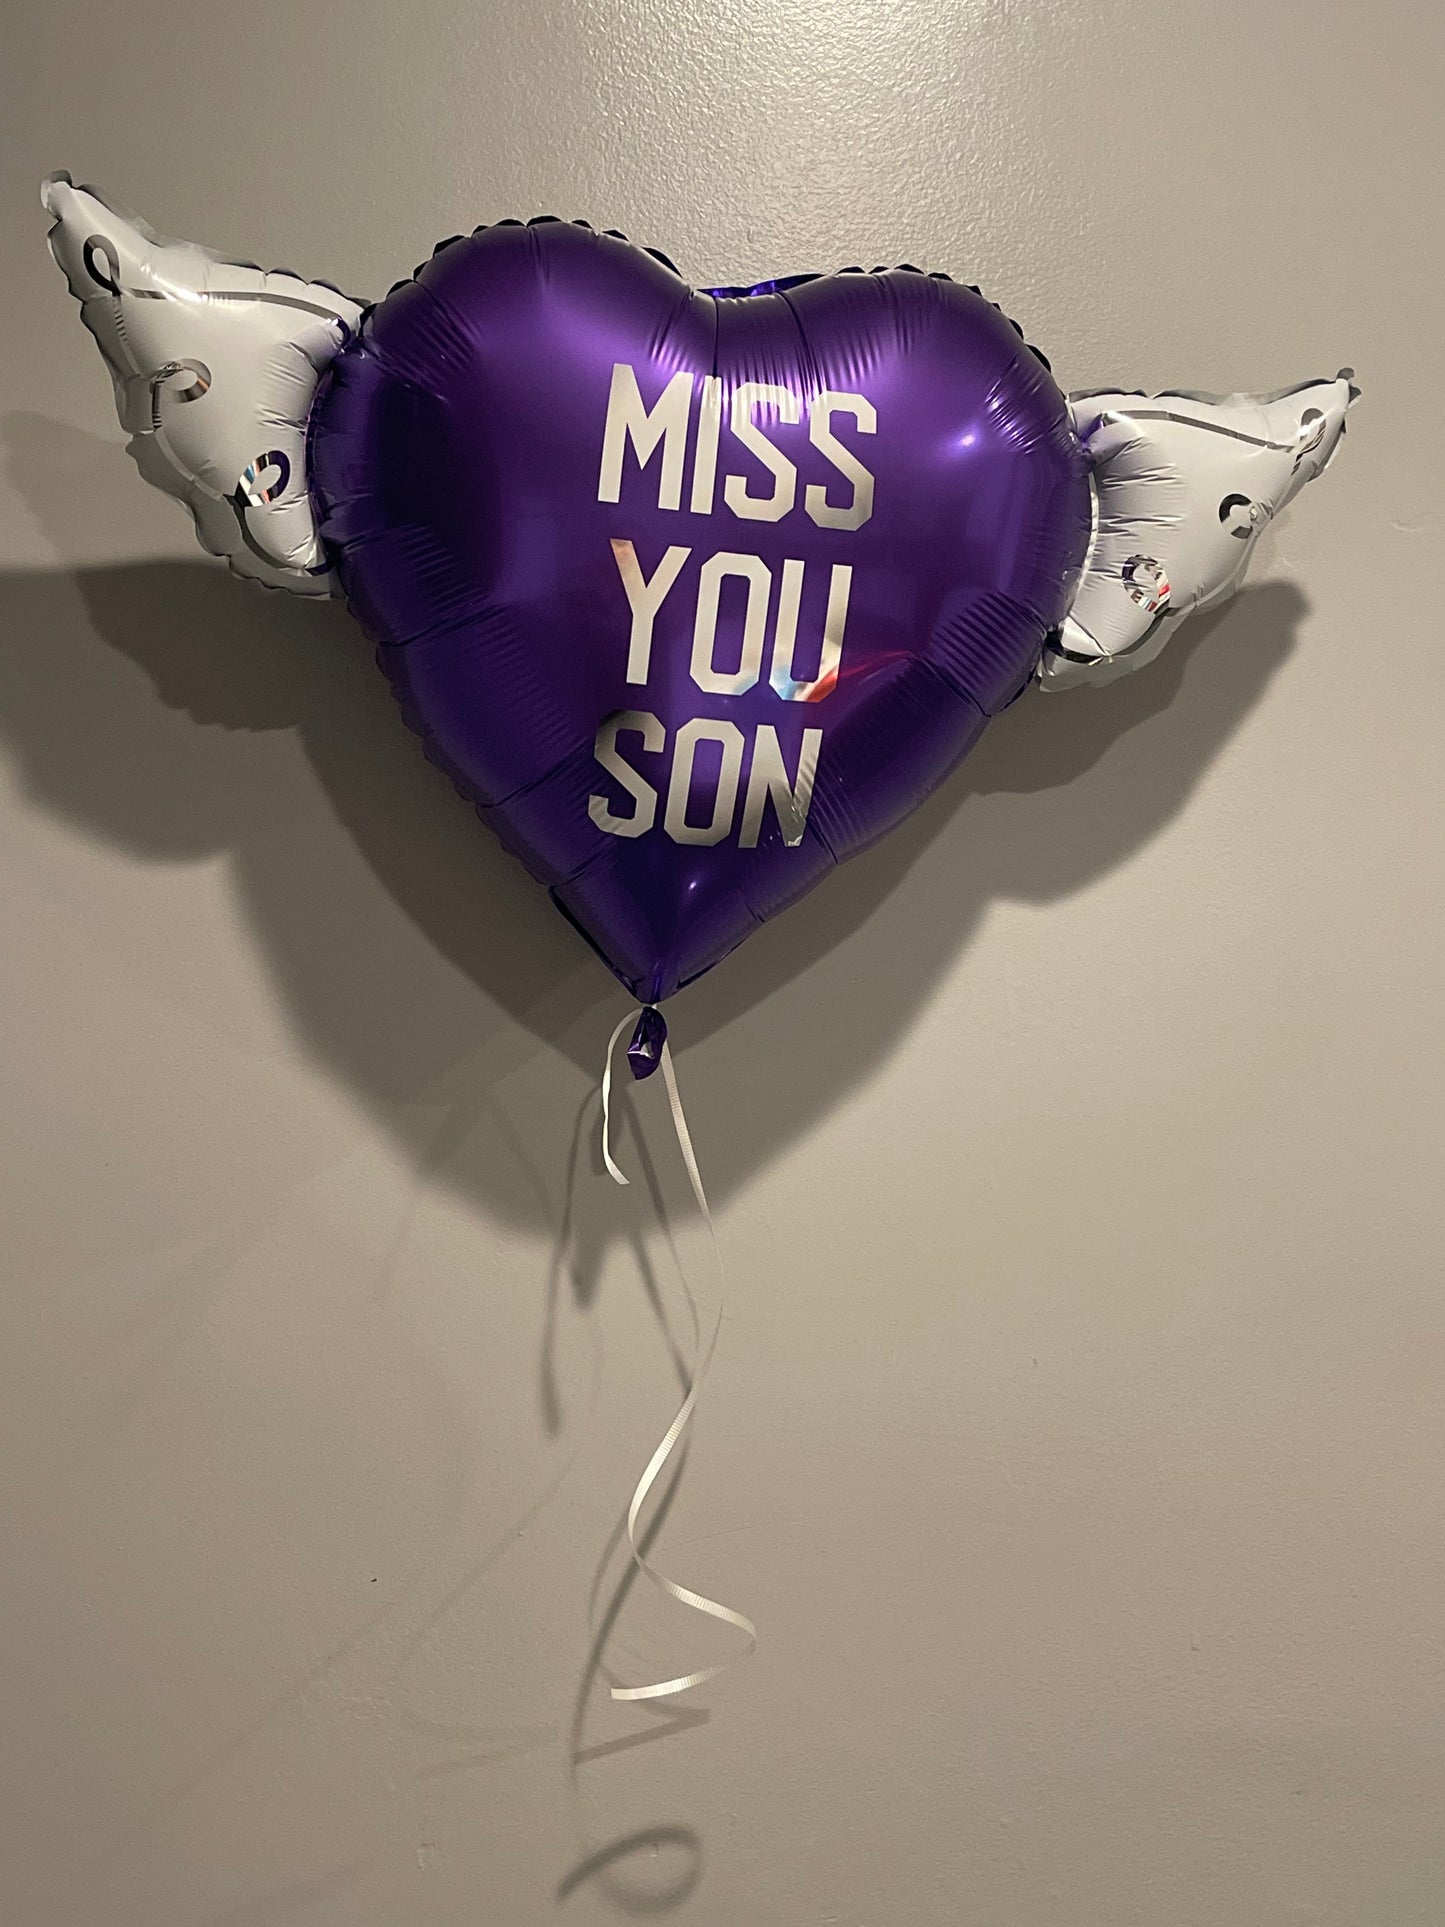 Miss You Son Heavenly Balloons ™ Heart Shaped with angel wings (Purple)